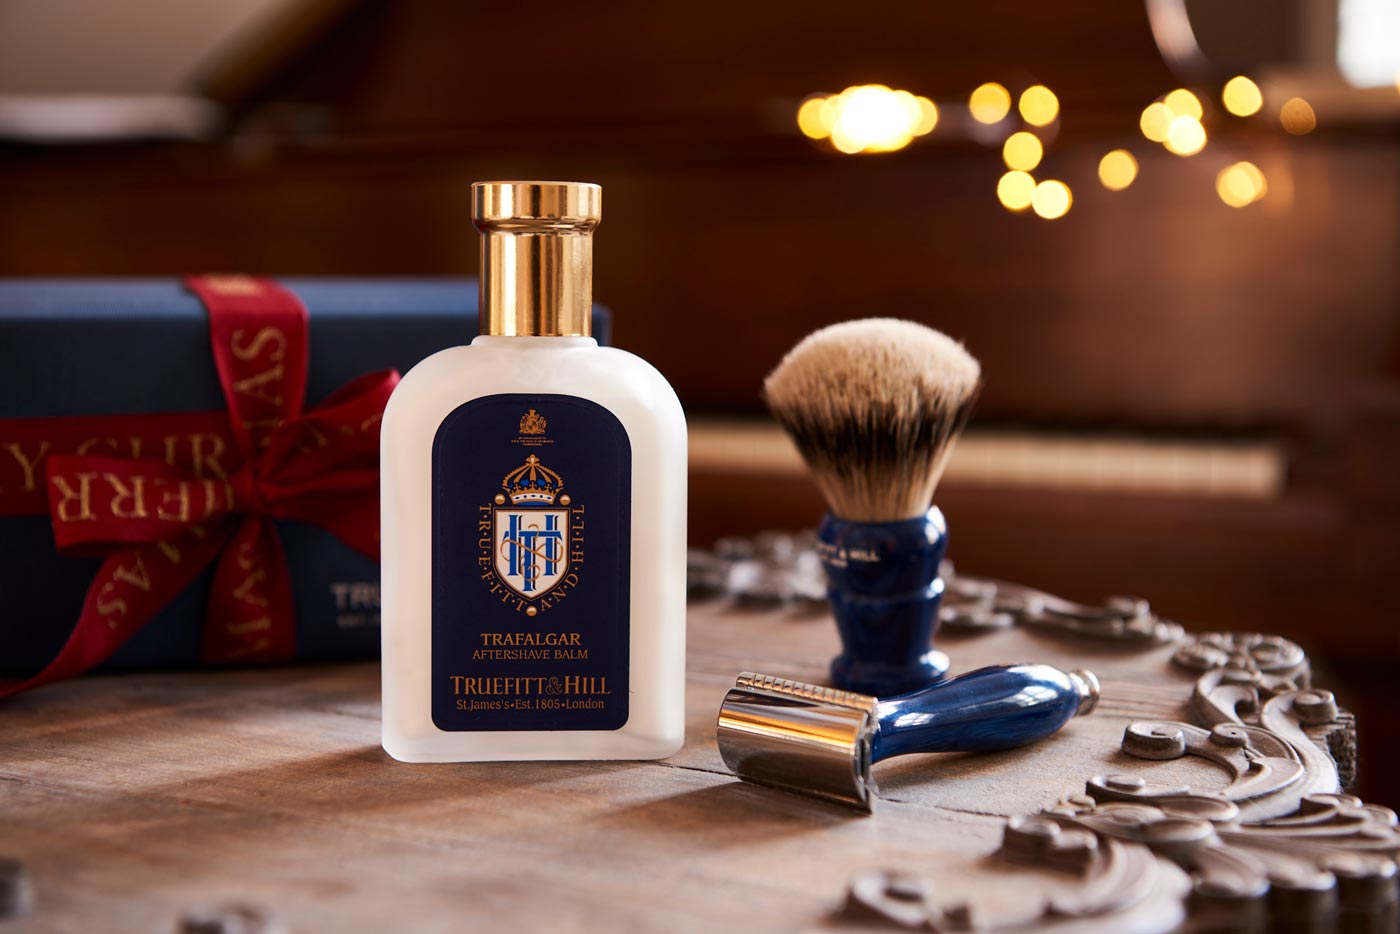 Lifestyle photography mens grooming products - London photographer Del Manning